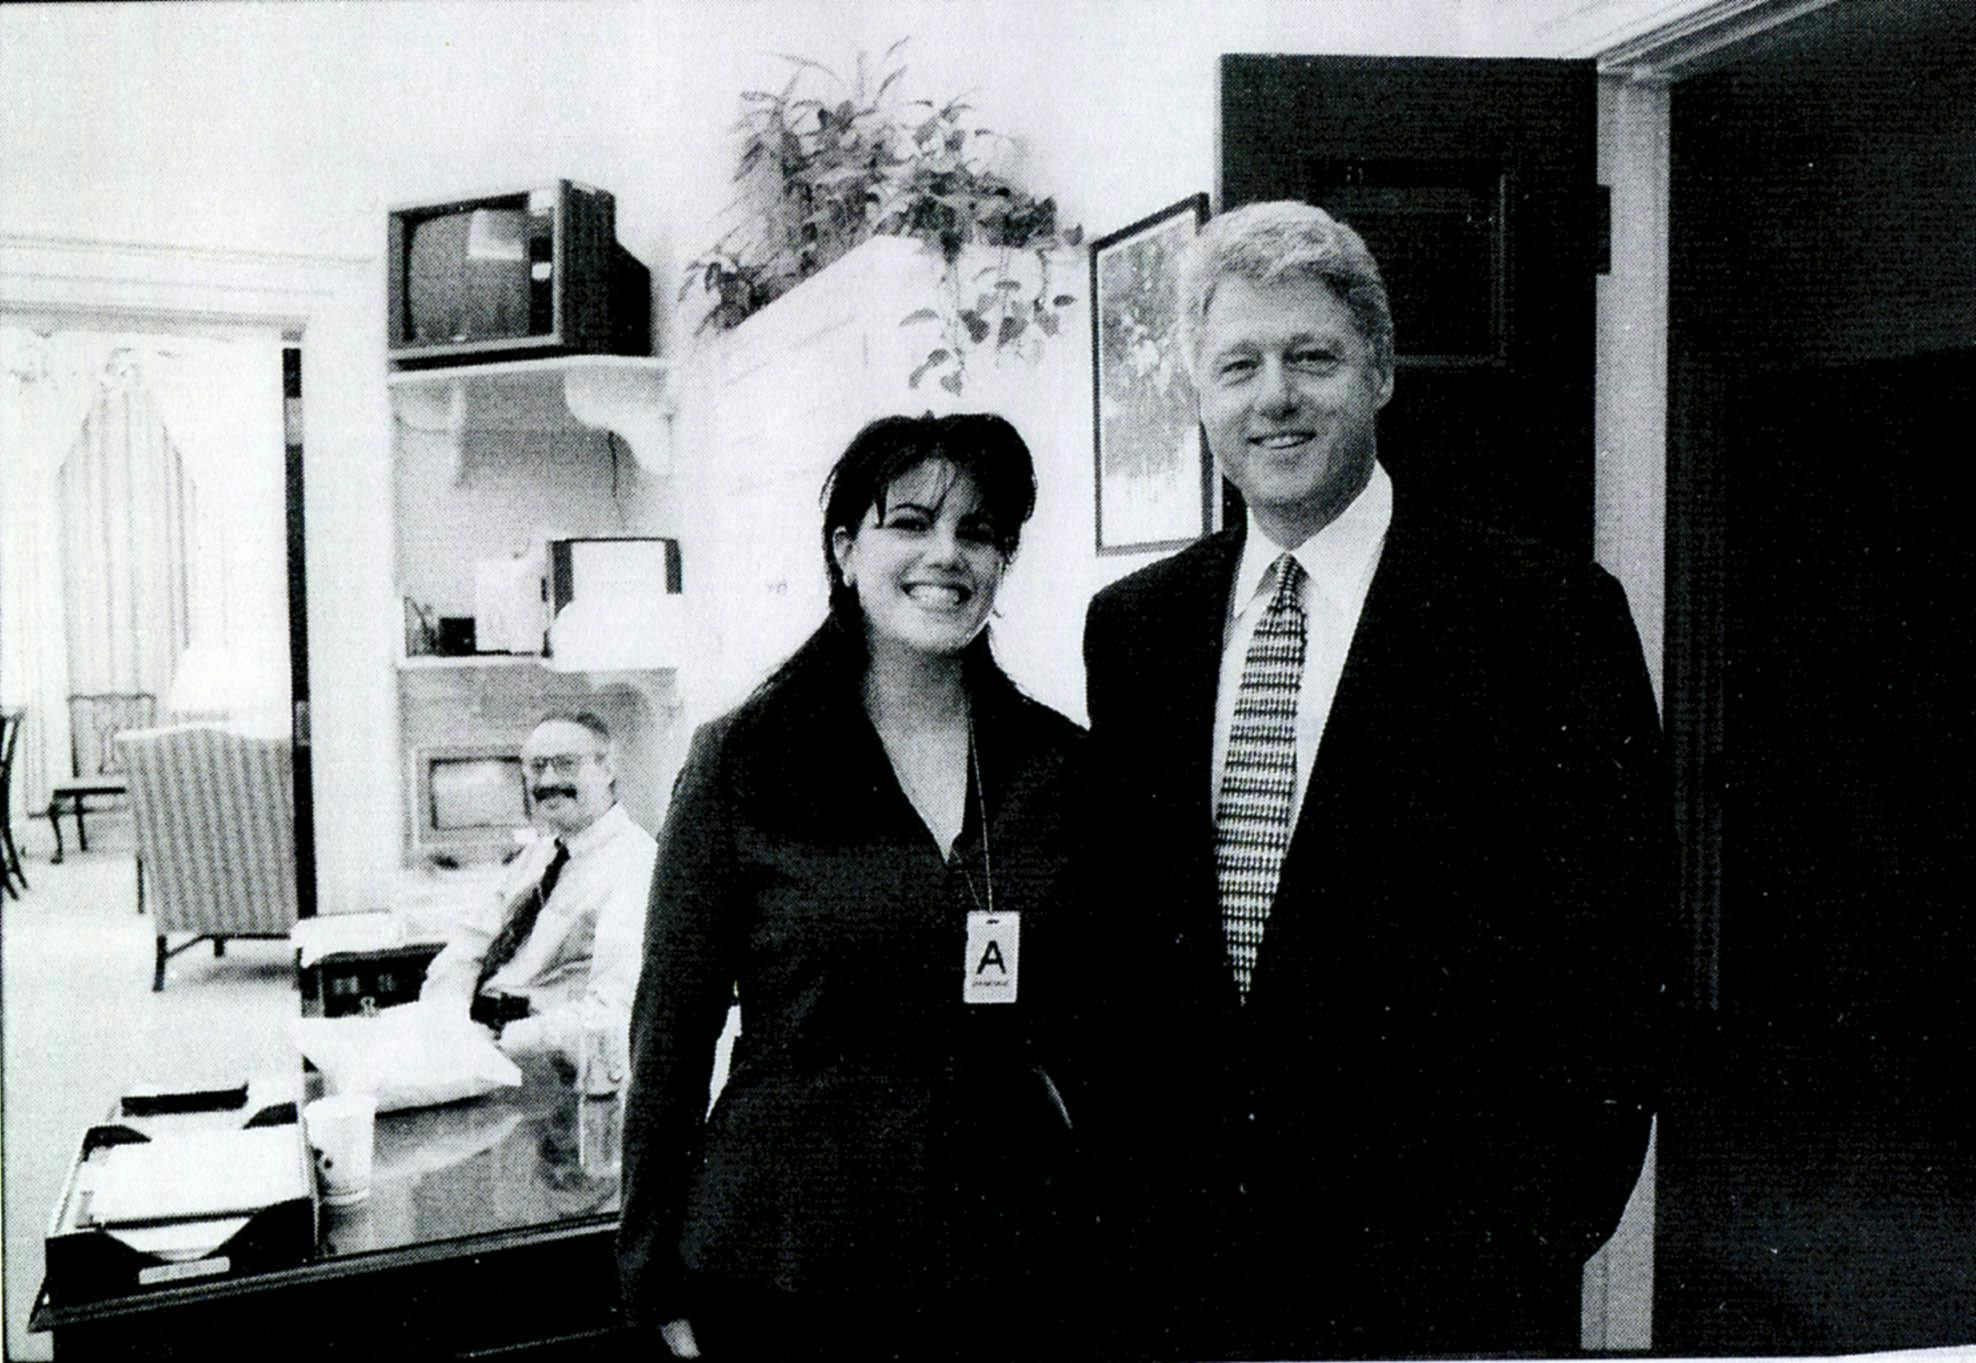 lewinsky evidence starr grand jury scandal clinton president washington dc tie accessories accessory person suit coat overcoat clothing chair furniture